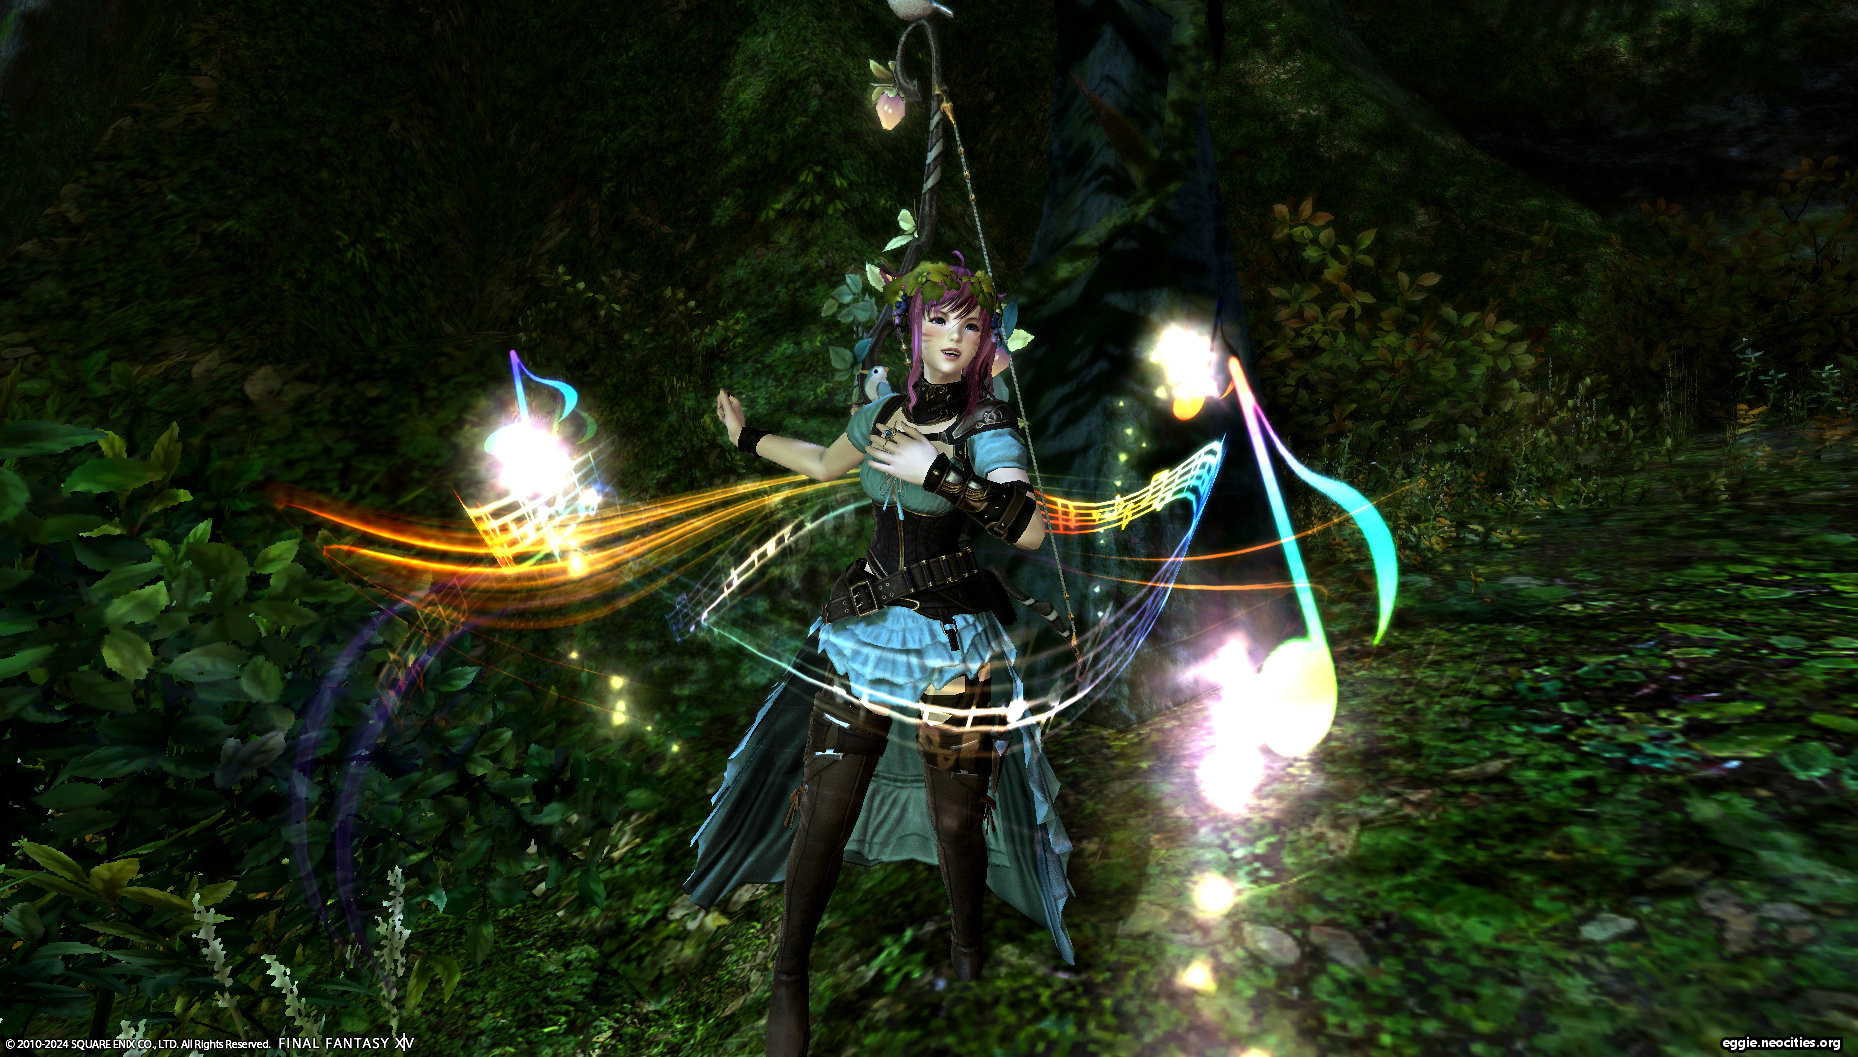 Zel posing with her new ranged glam.